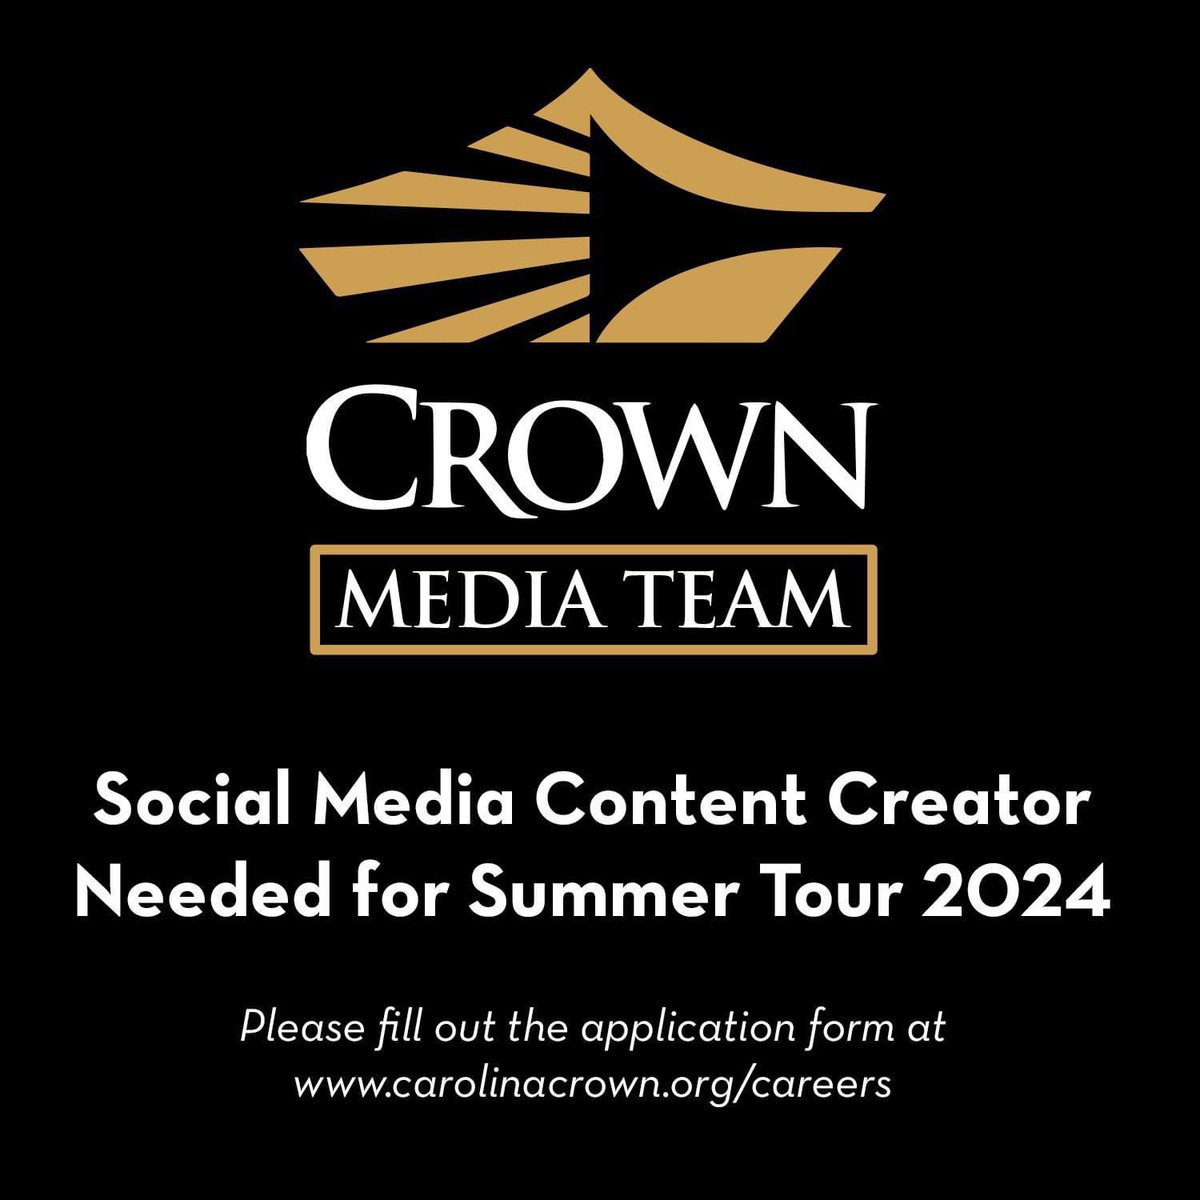 Carolina Crown Inc. is seeking qualified applicants for a 𝐒𝐨𝐜𝐢𝐚𝐥 𝐌𝐞𝐝𝐢𝐚 𝐂𝐨𝐧𝐭𝐞𝐧𝐭 𝐂𝐫𝐞𝐚𝐭𝐨𝐫 position on our Corps Media Team! ➡ For more information and how to apply, visit: carolinacrown.org/careers